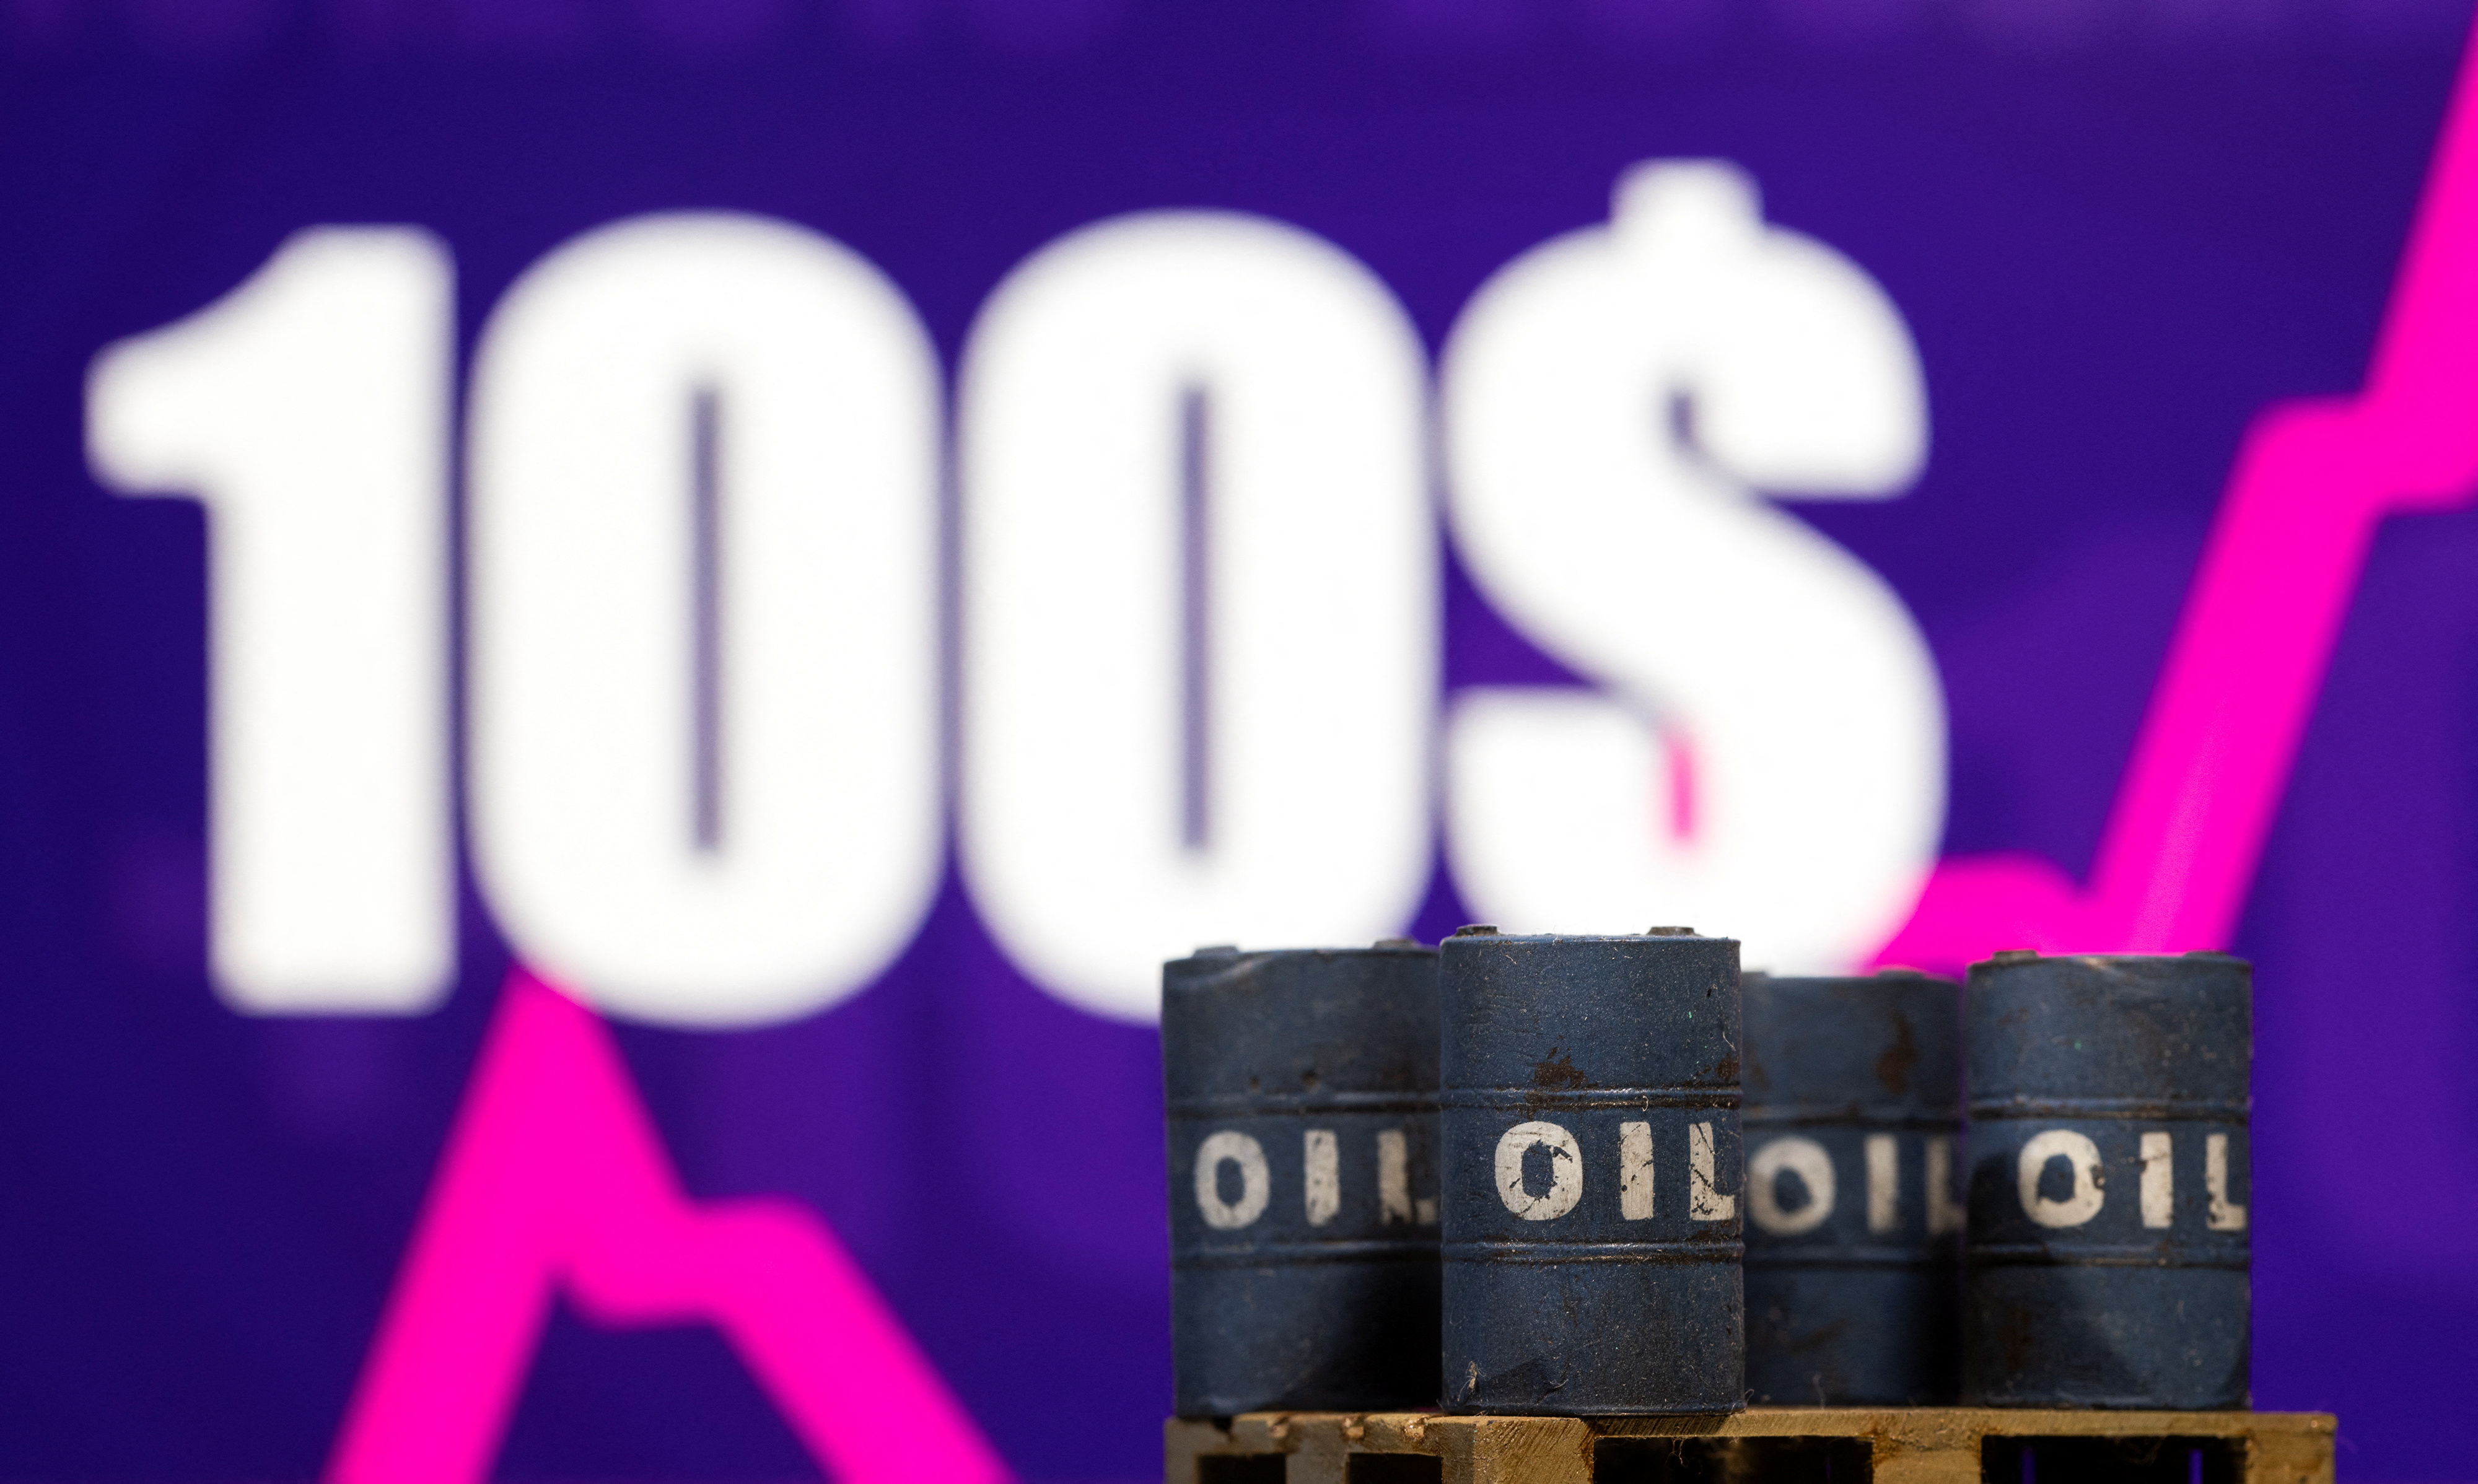 Illustration shows models of oil barrel in front of displayed rising stock graph